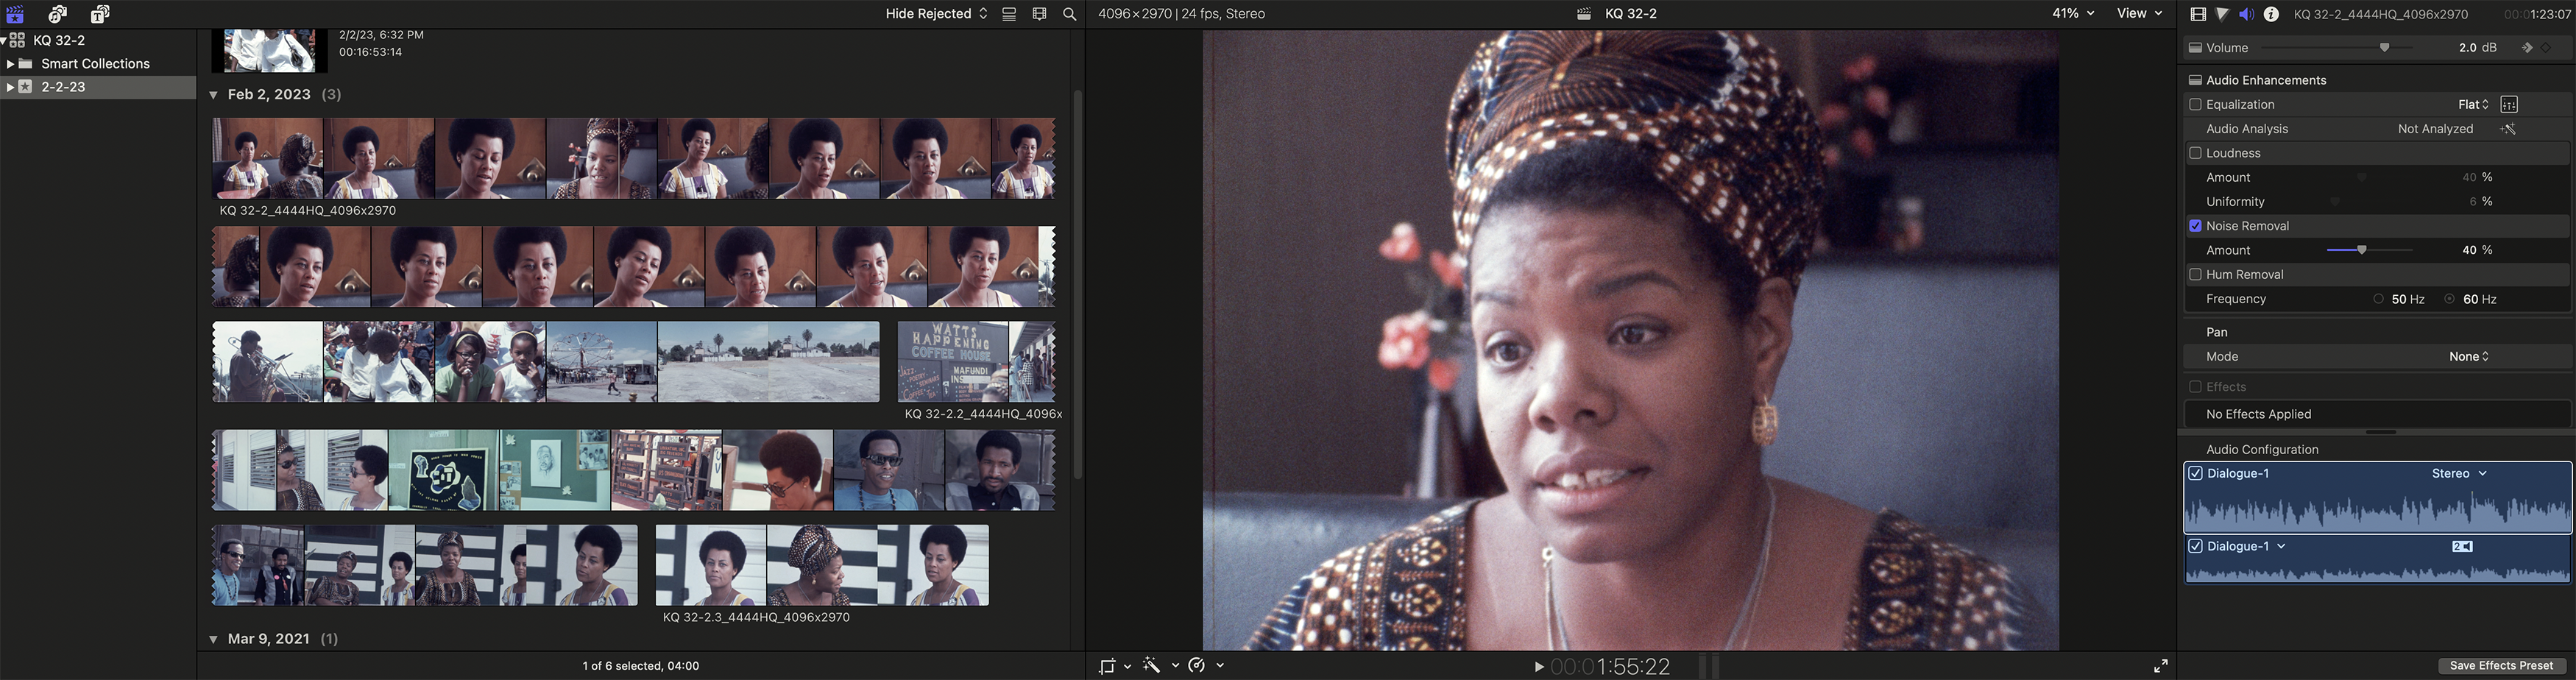 Editing KQED 16mm film featuring Dr. May Angelou, from 1968.